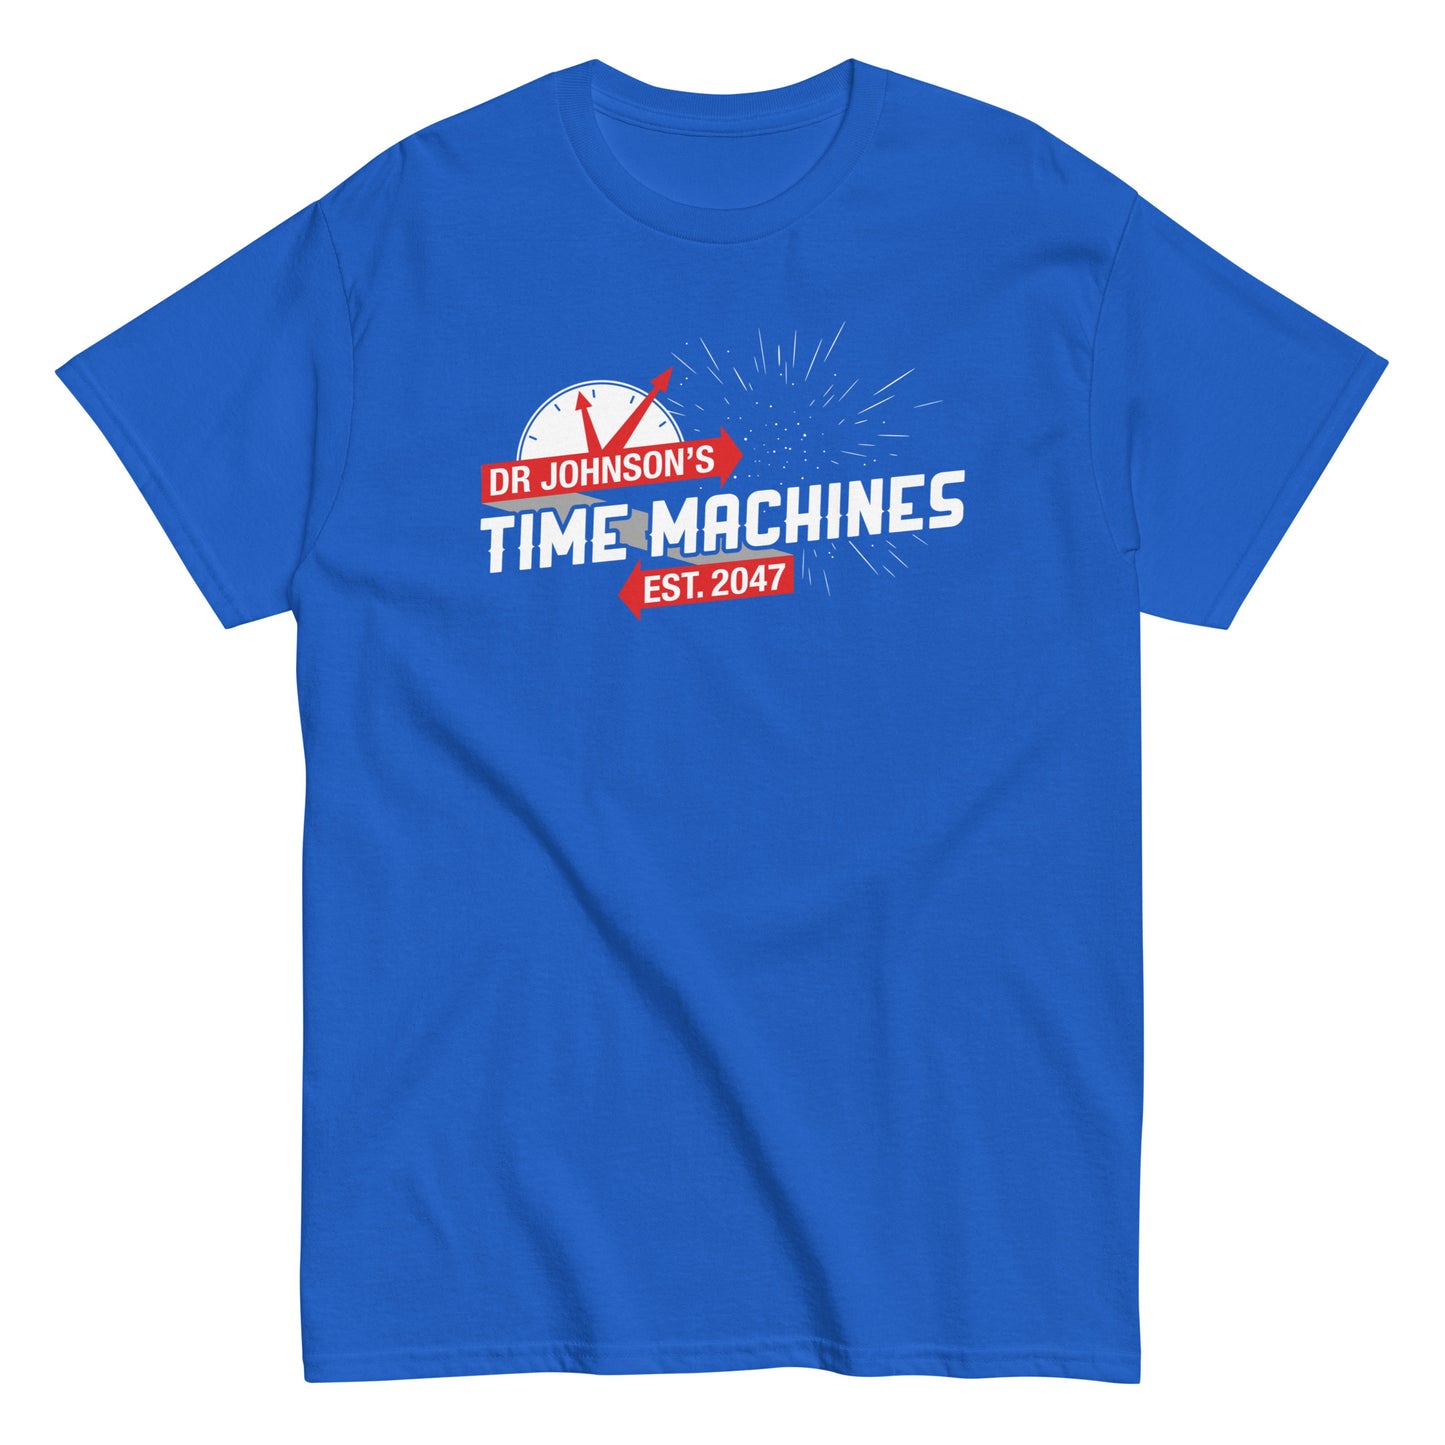 Dr Johnson's Time Machines Men's Classic Tee